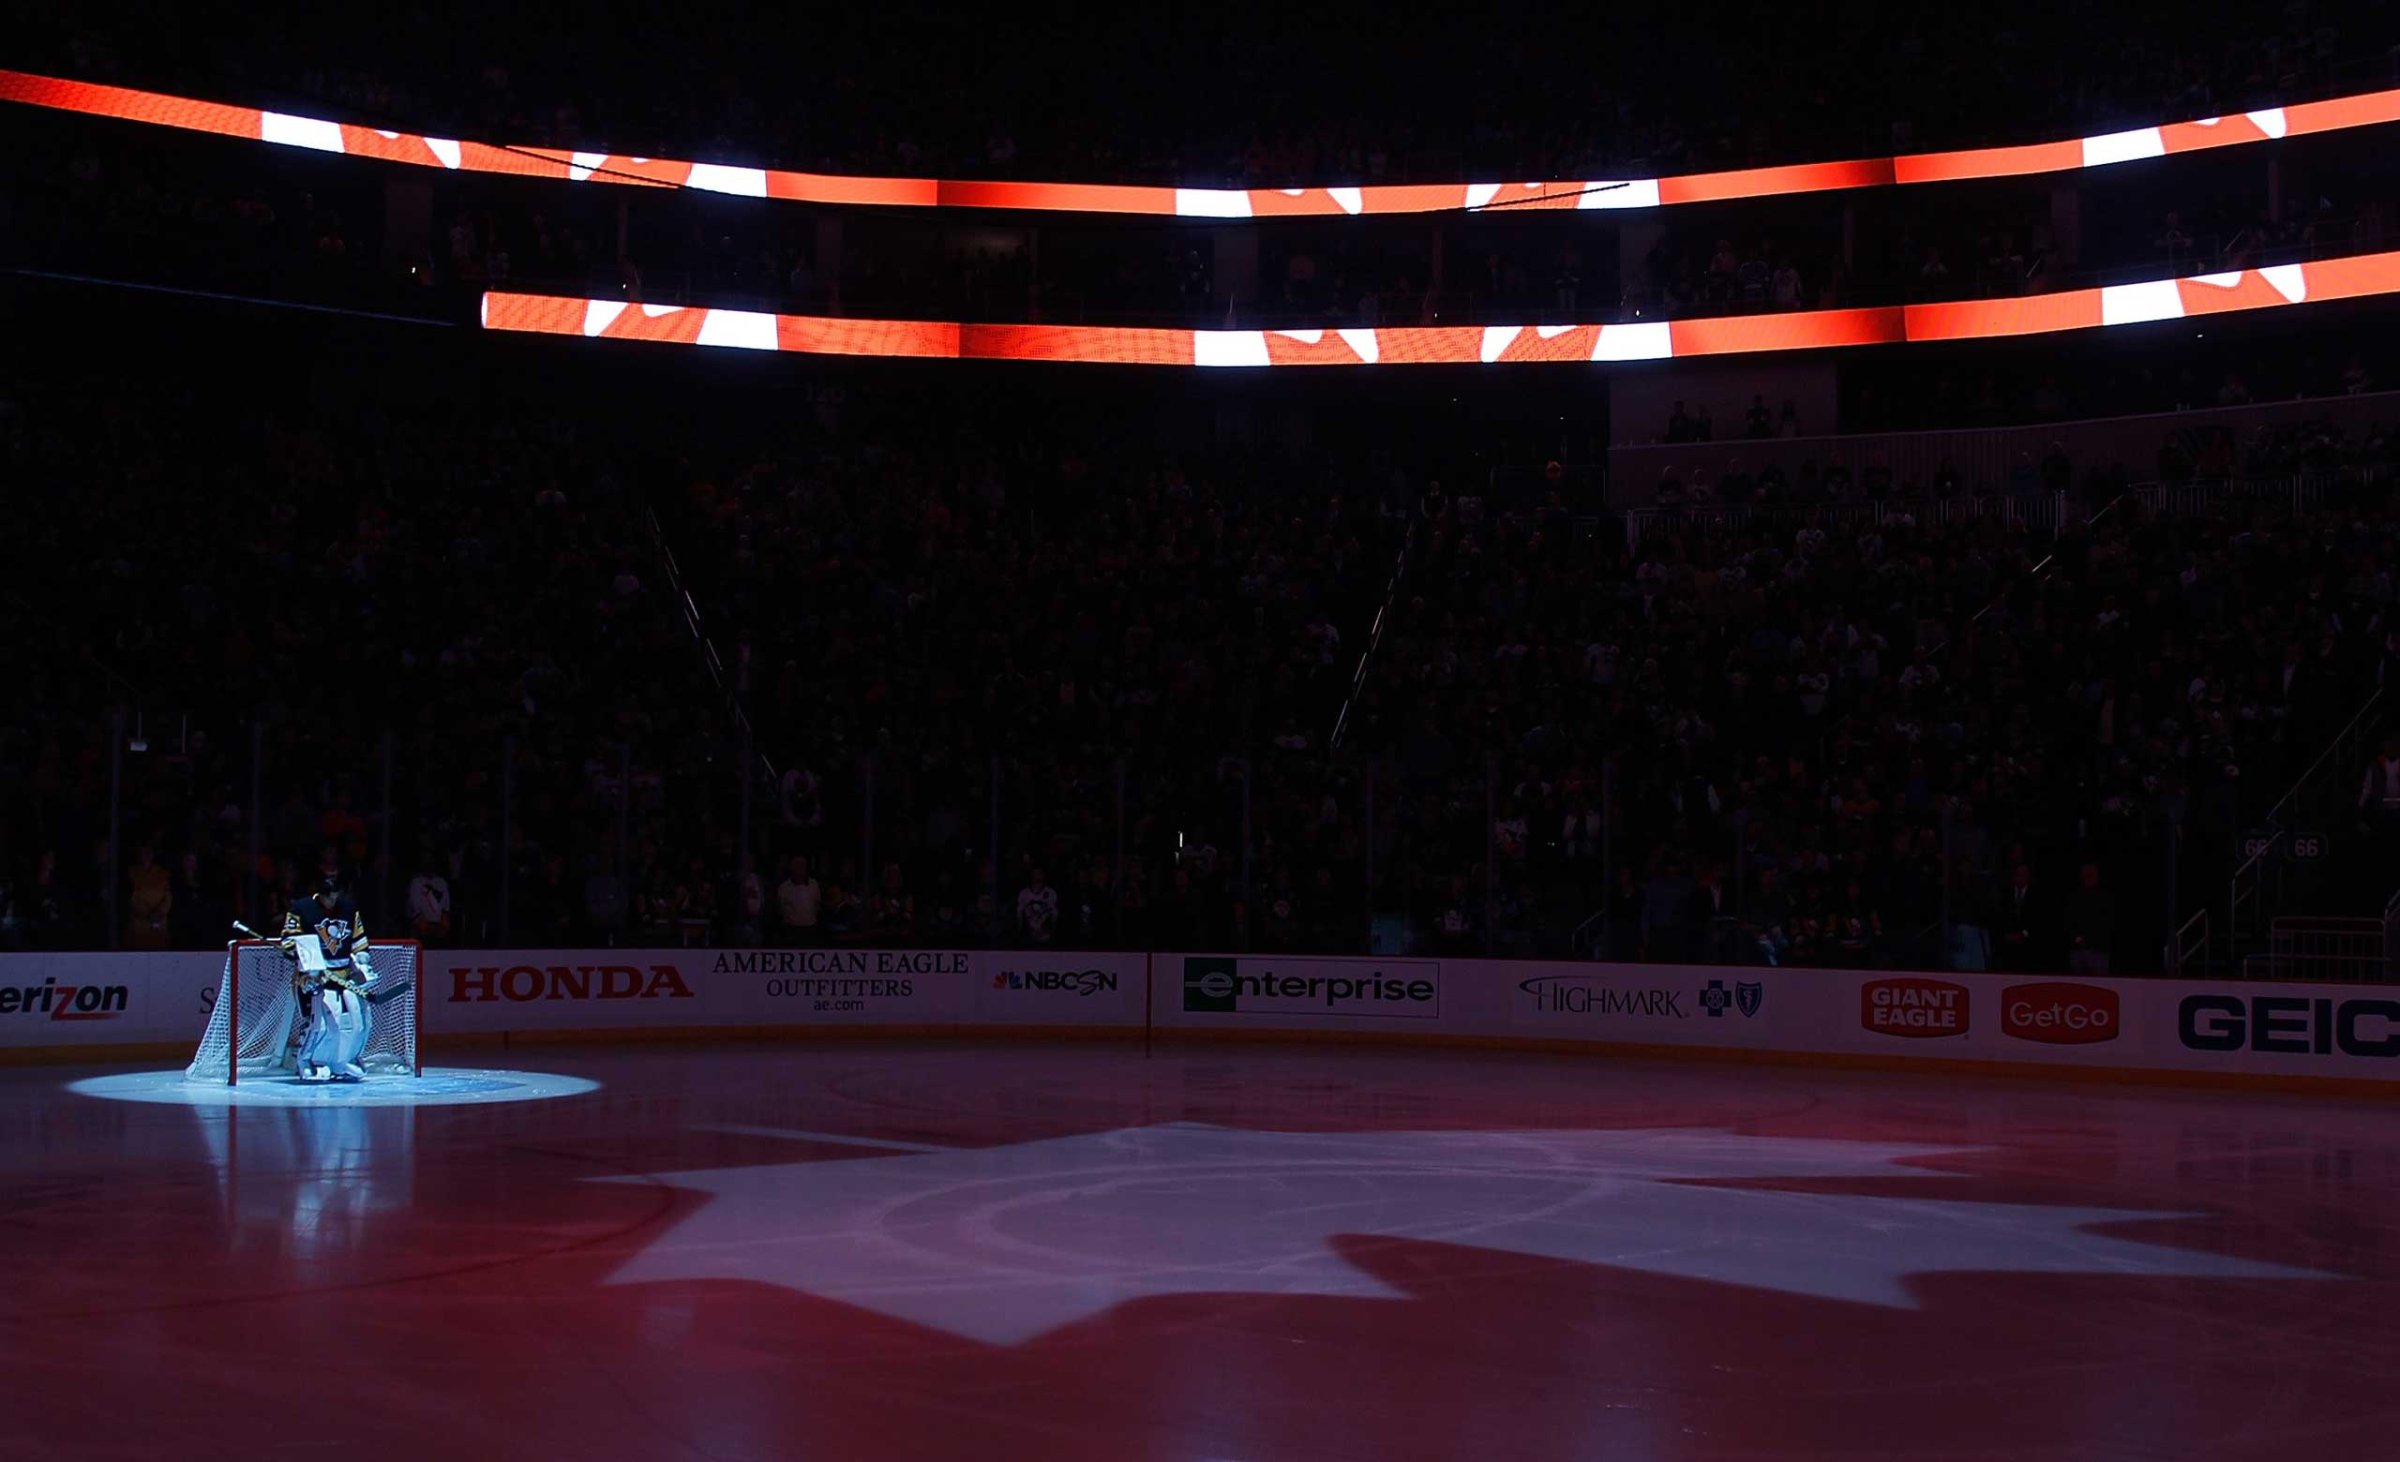 The Canadian National Anthem is performed in honor of the shooting victims in Ottawa during the game between the Philadelphia Flyers and Pittsburgh Penguins at Consol Energy Center on Oct. 22, 2014 in Pittsburgh, Pa.